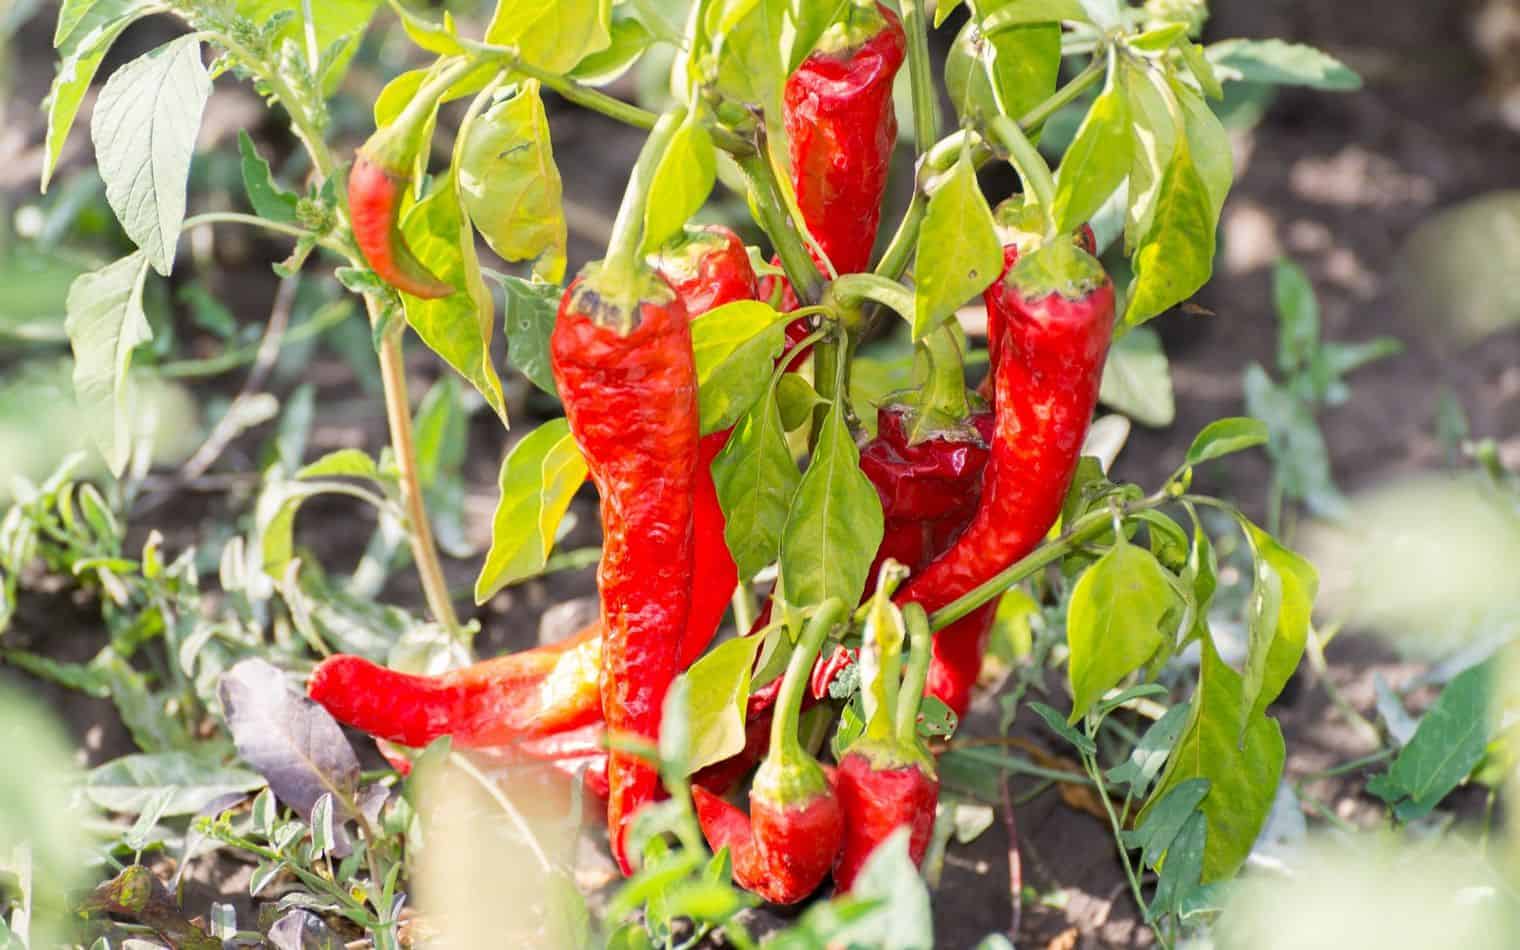 Growing Chilies in a Garden